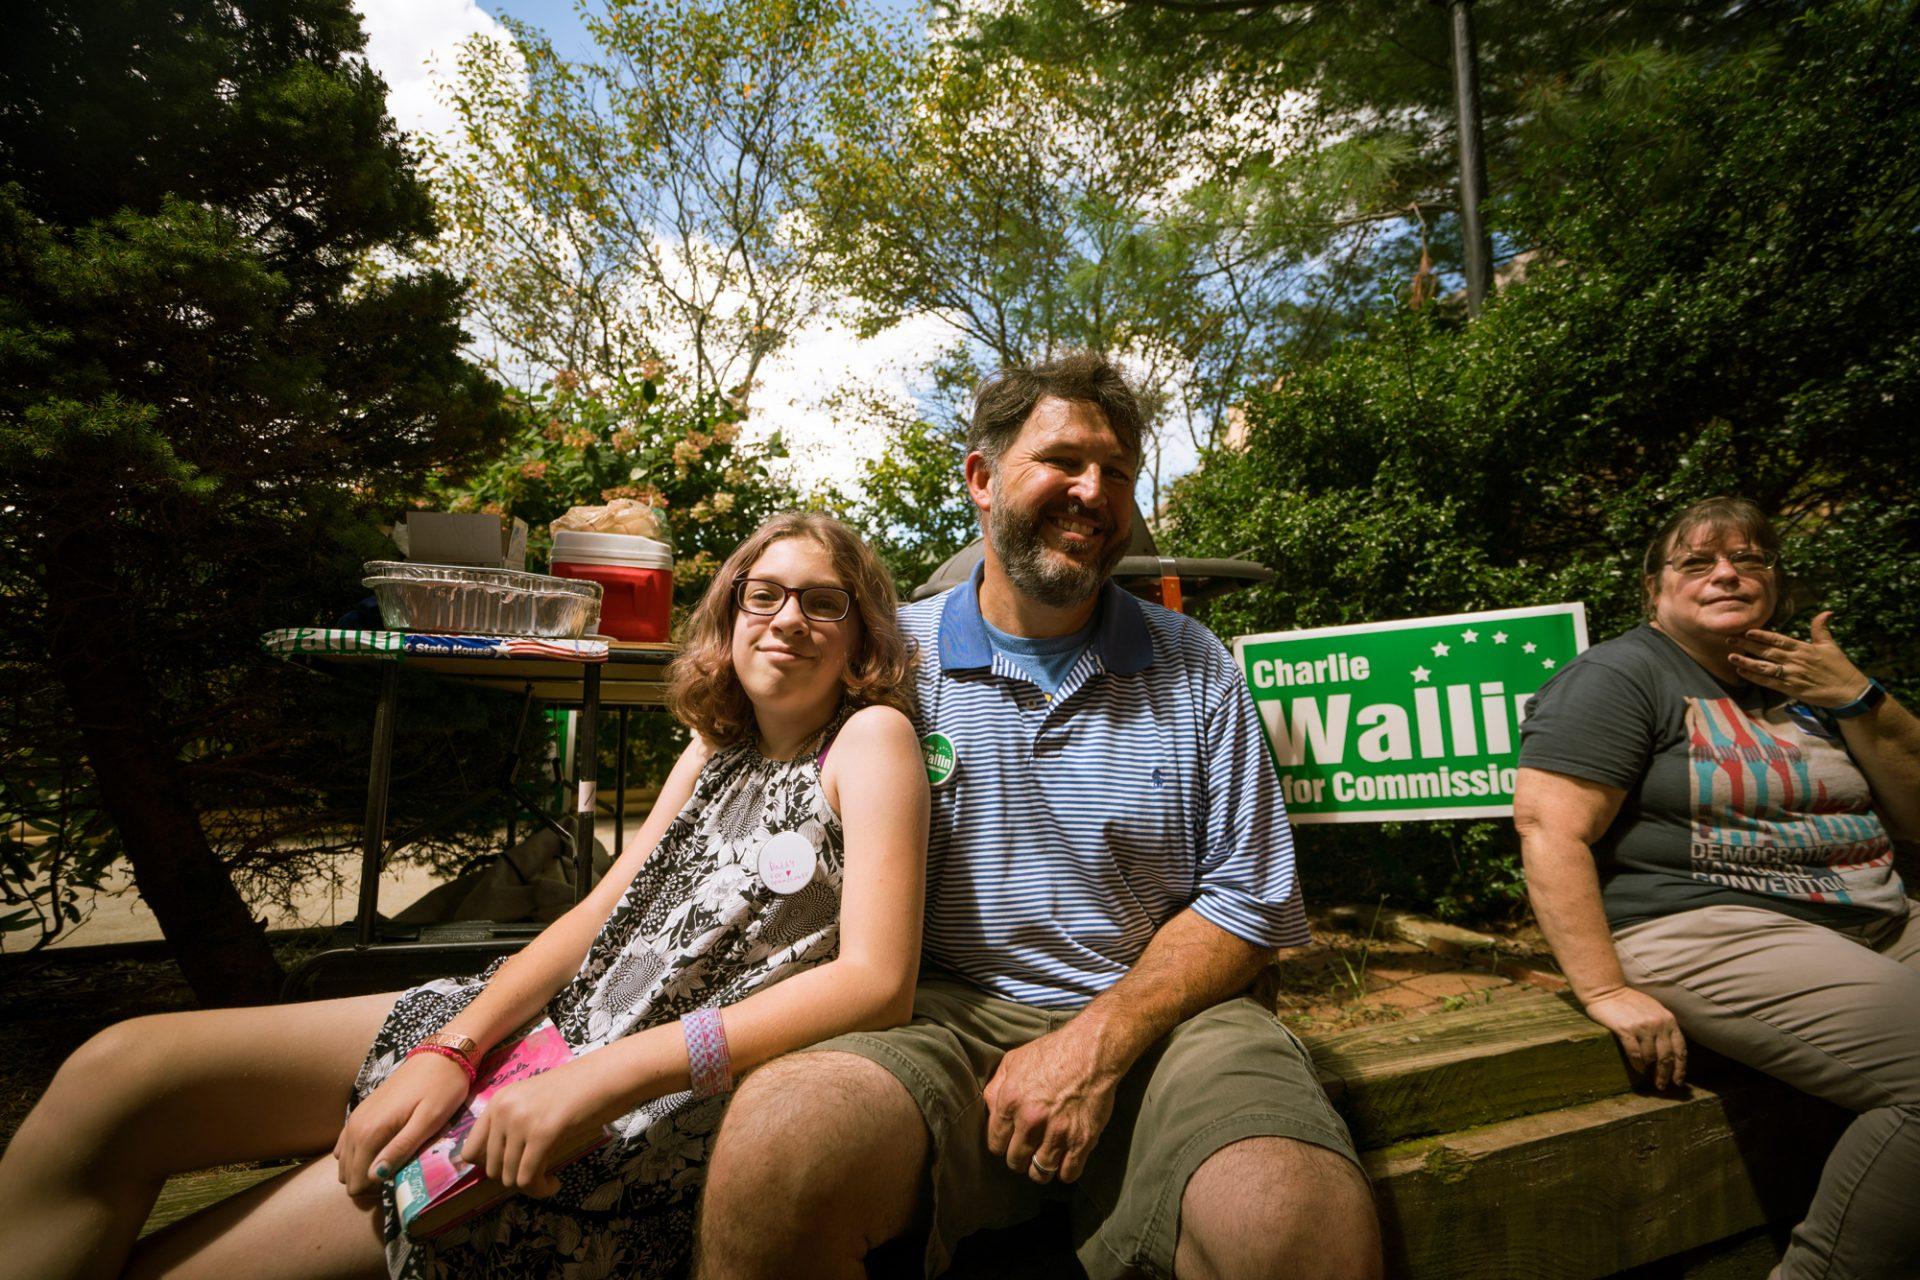 County commissioner candidate and Food Services manager Charlie Wallin with his daughter, who appointed herself campaign education coordinator. Wallin grilled for the Labor Day party as usual, despite having caught on fire while doing so years ago. 